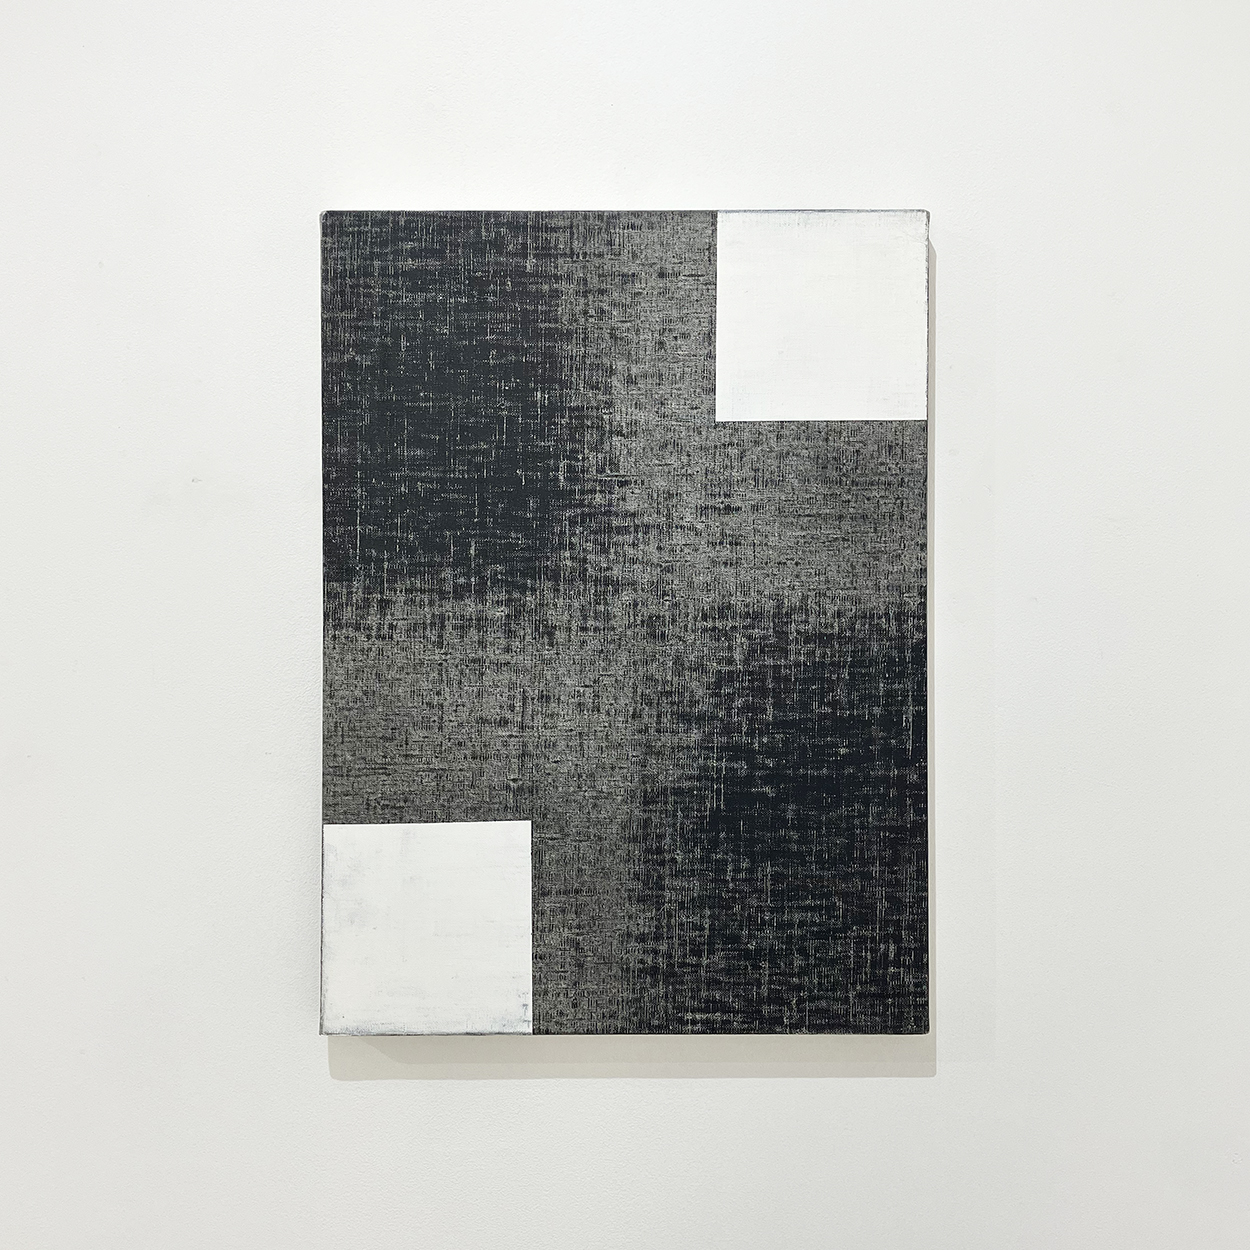 Untitled, Oil on canvas, 45.5 x 33.5 cm, 1984-2015